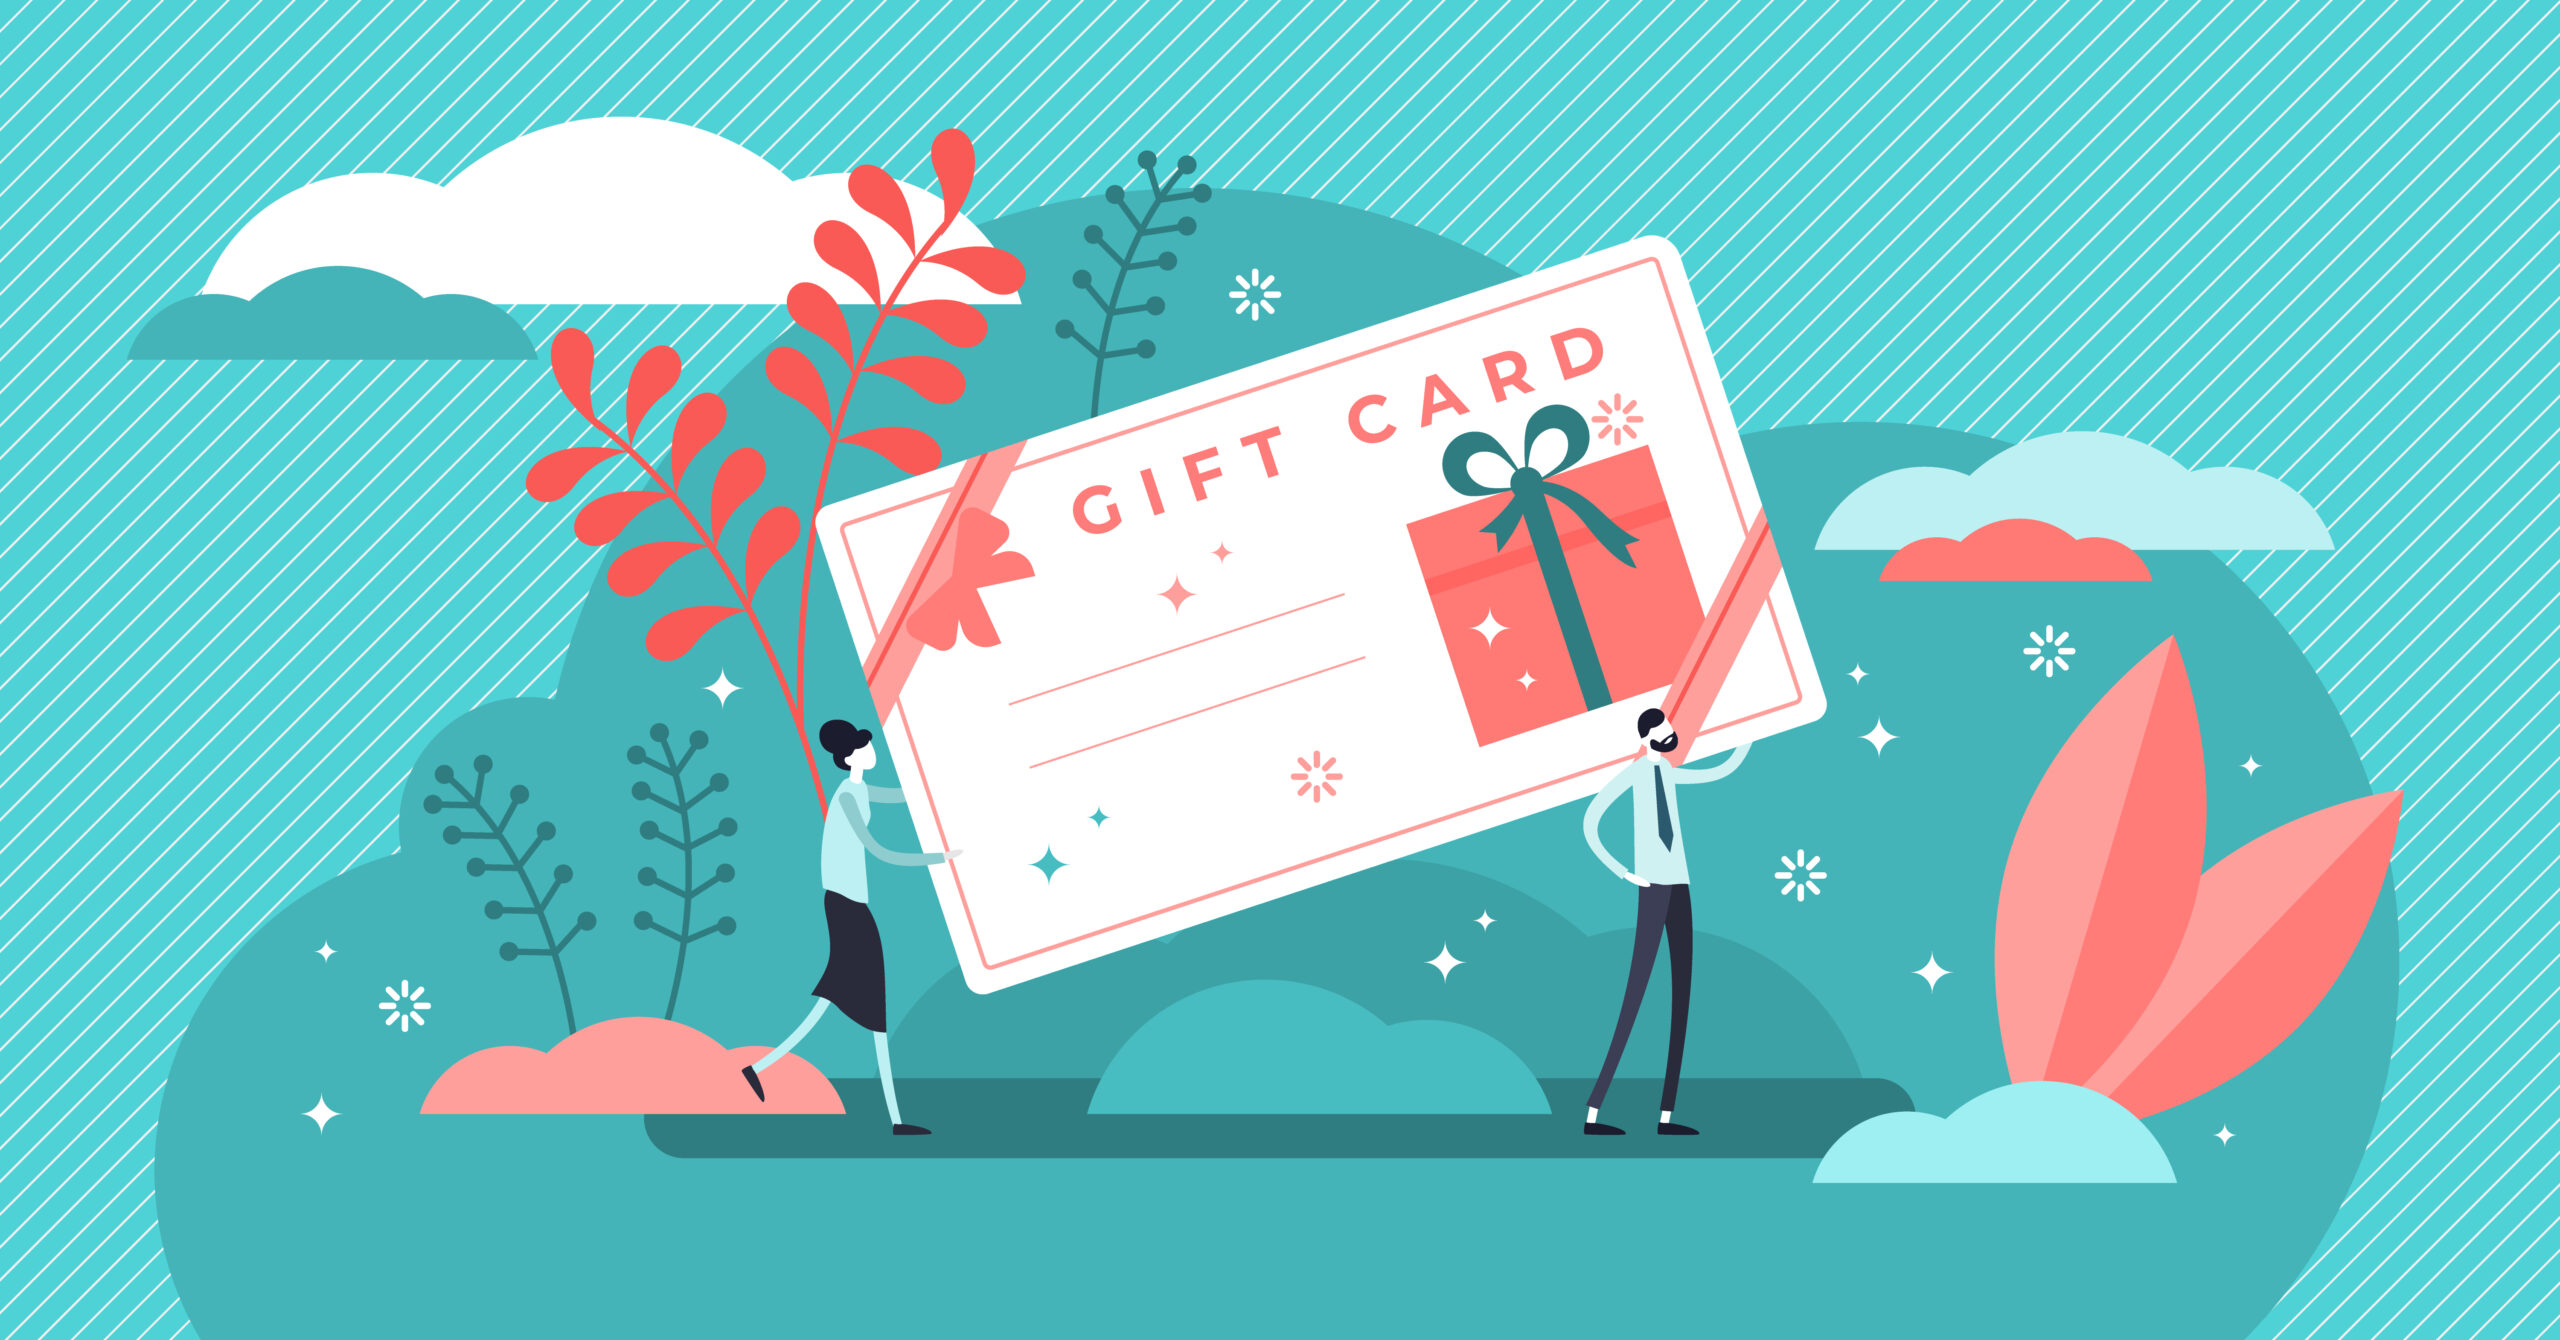 Gift card vector showing two tiny people holding or exchanging a big gift card certificate for any occasion on a teal background.